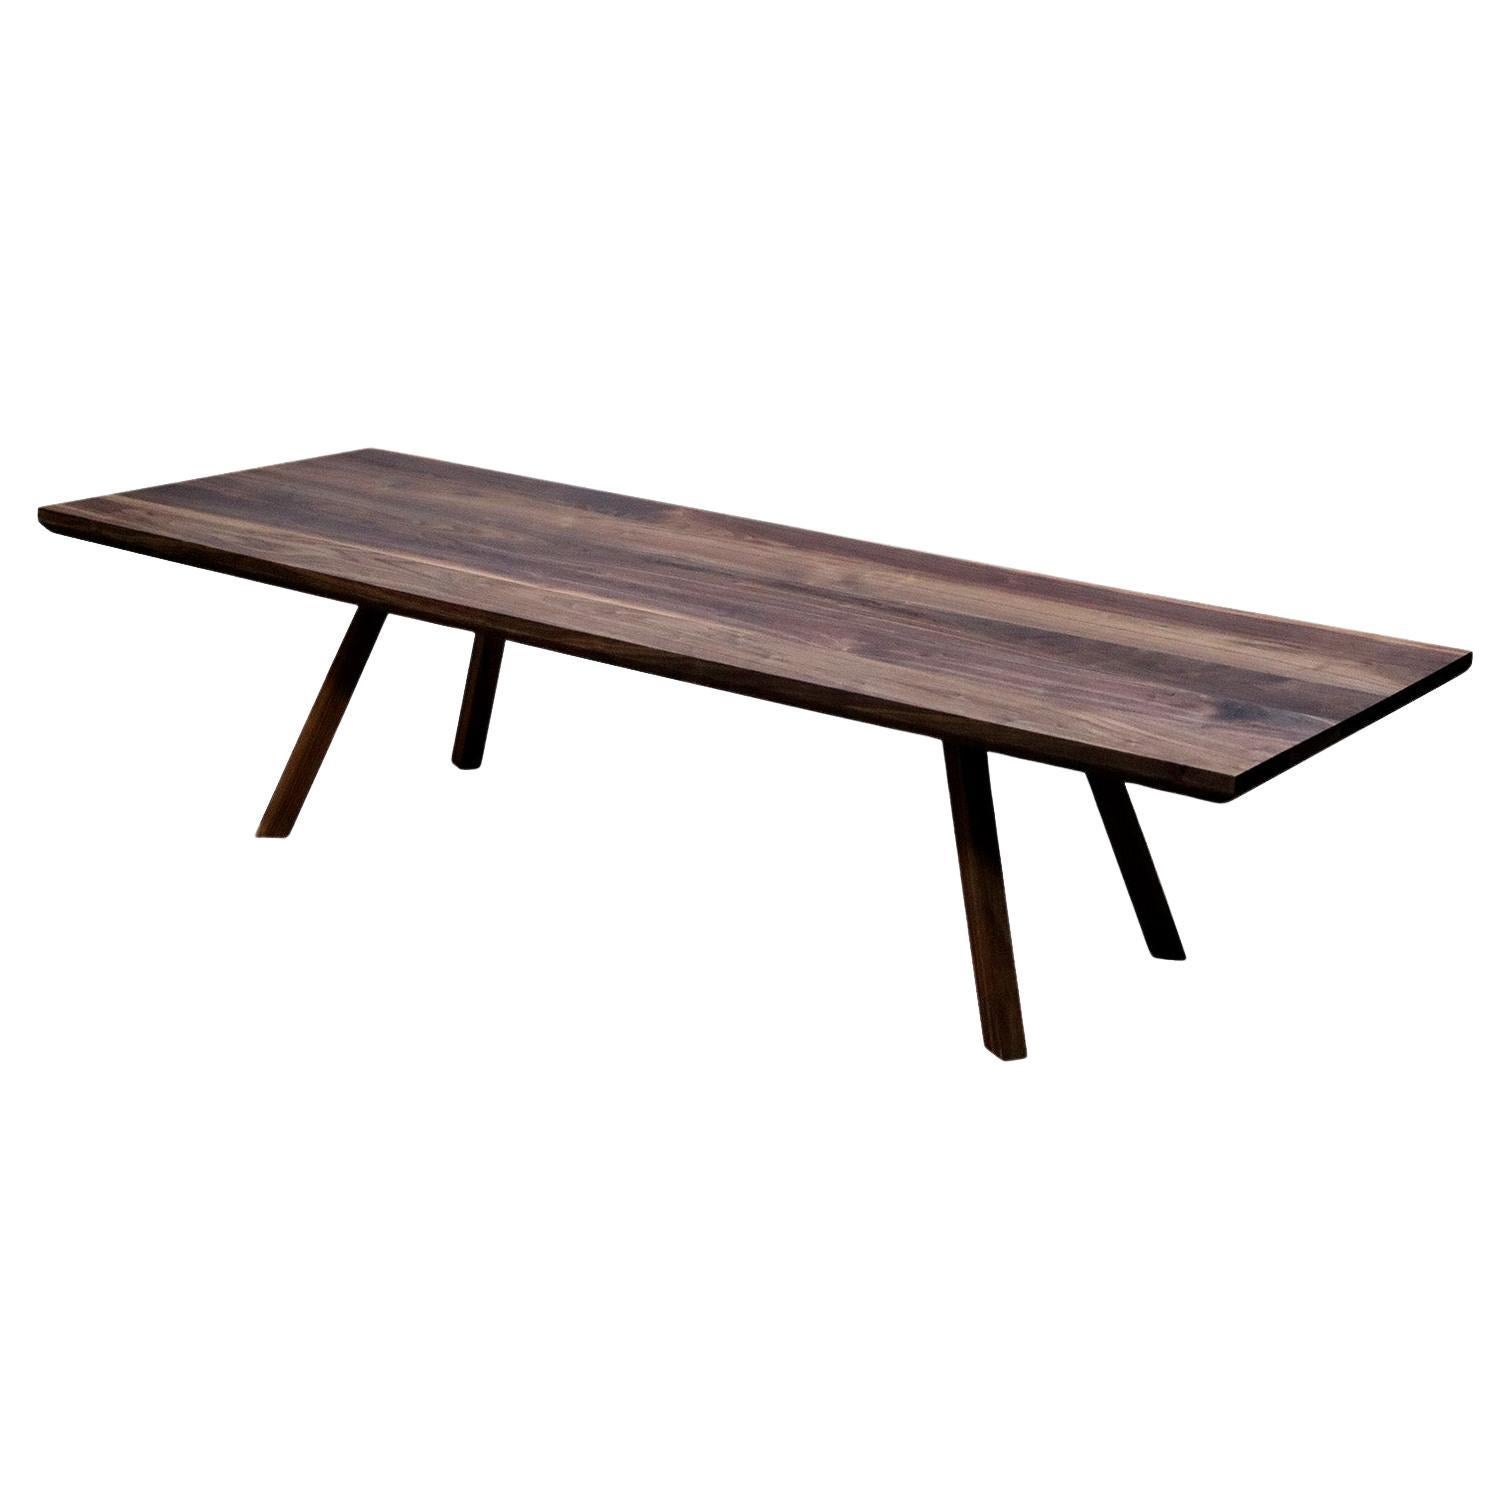 Apate Solid Walnut Coffee Table